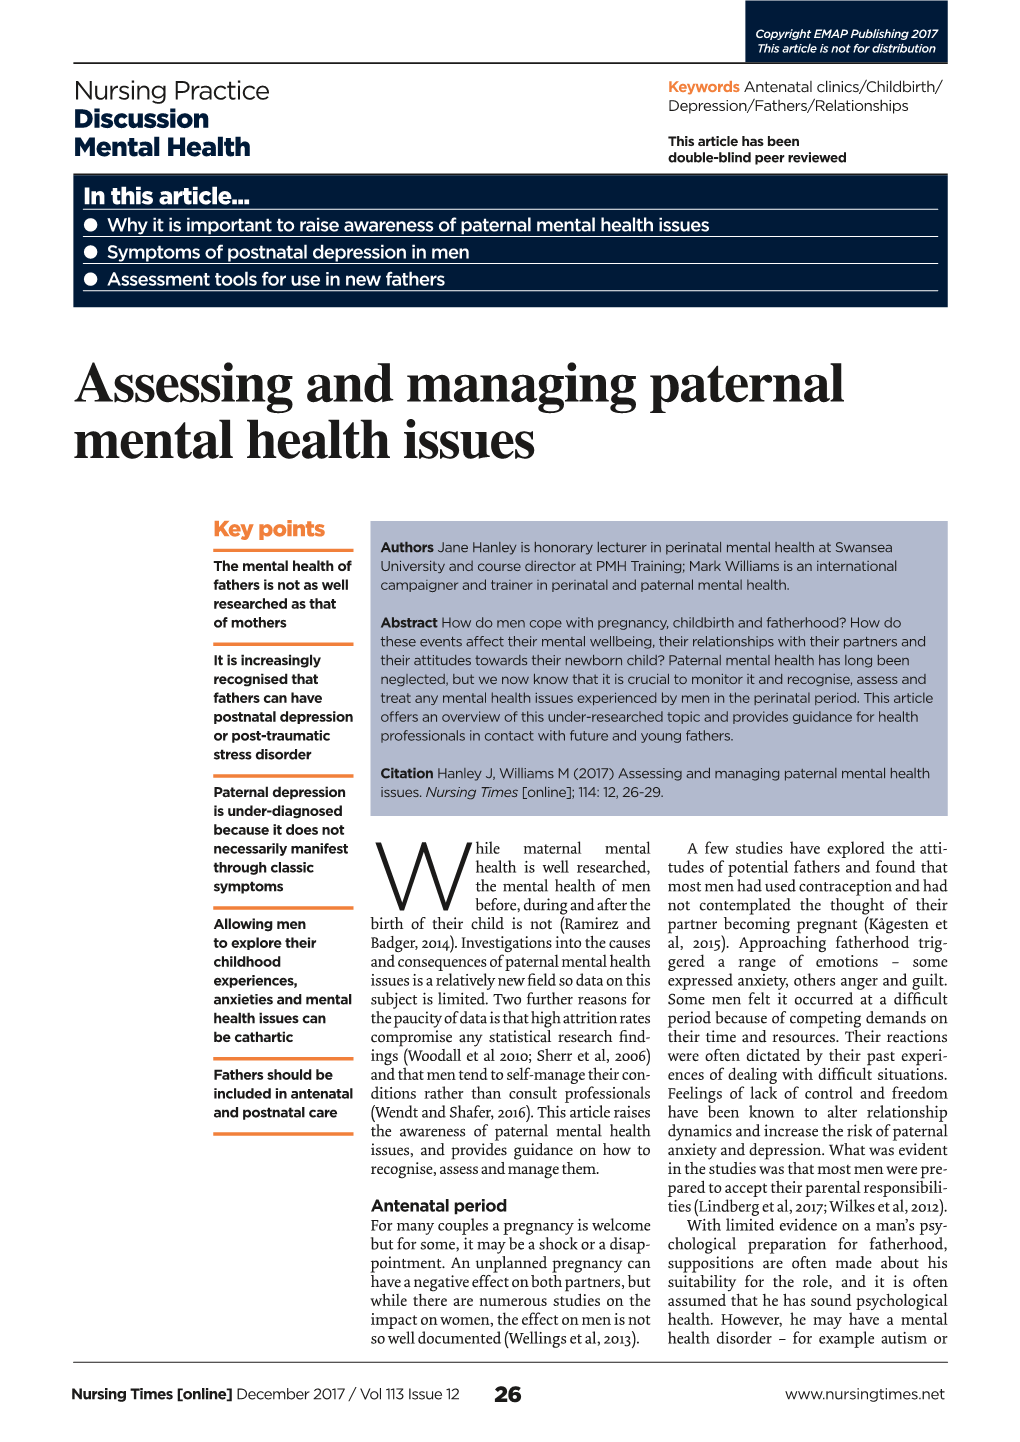 171122 Assessing and Managing Paternal Mental Health Issues